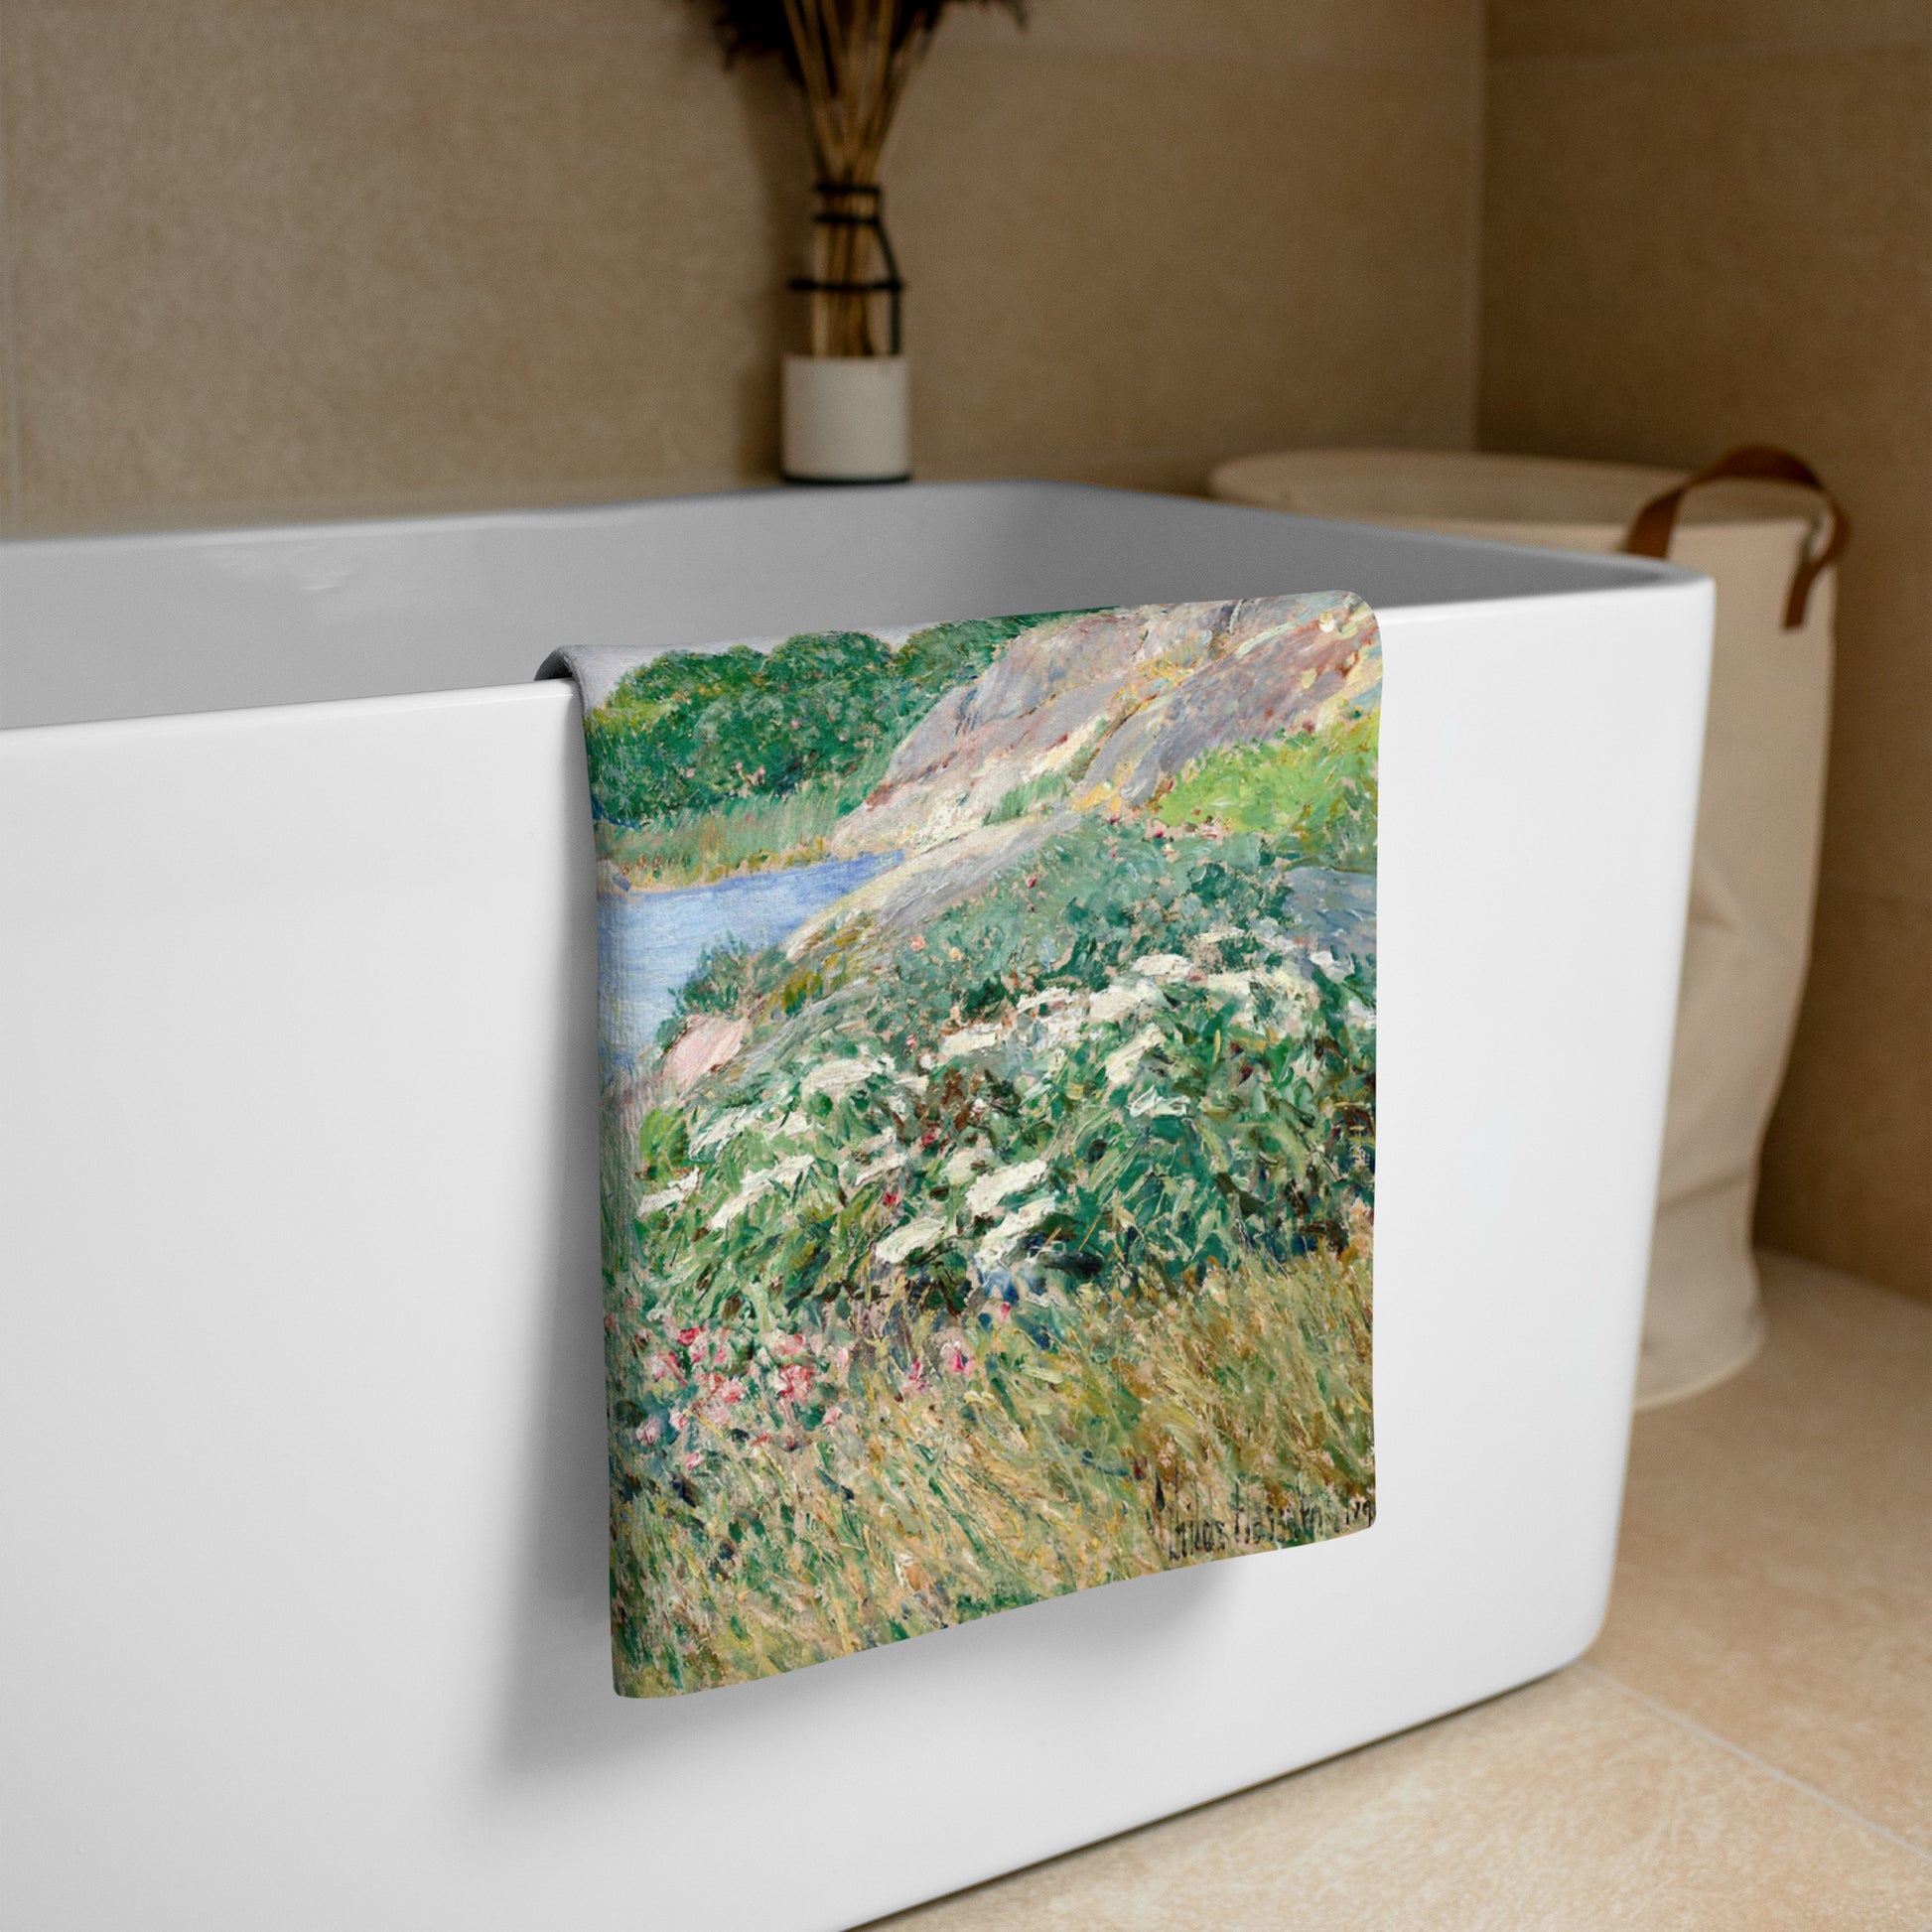 Beach towel featuring painting 'The little pond, Appledore' by Frederick Childe Hassam, hanging over a white bath